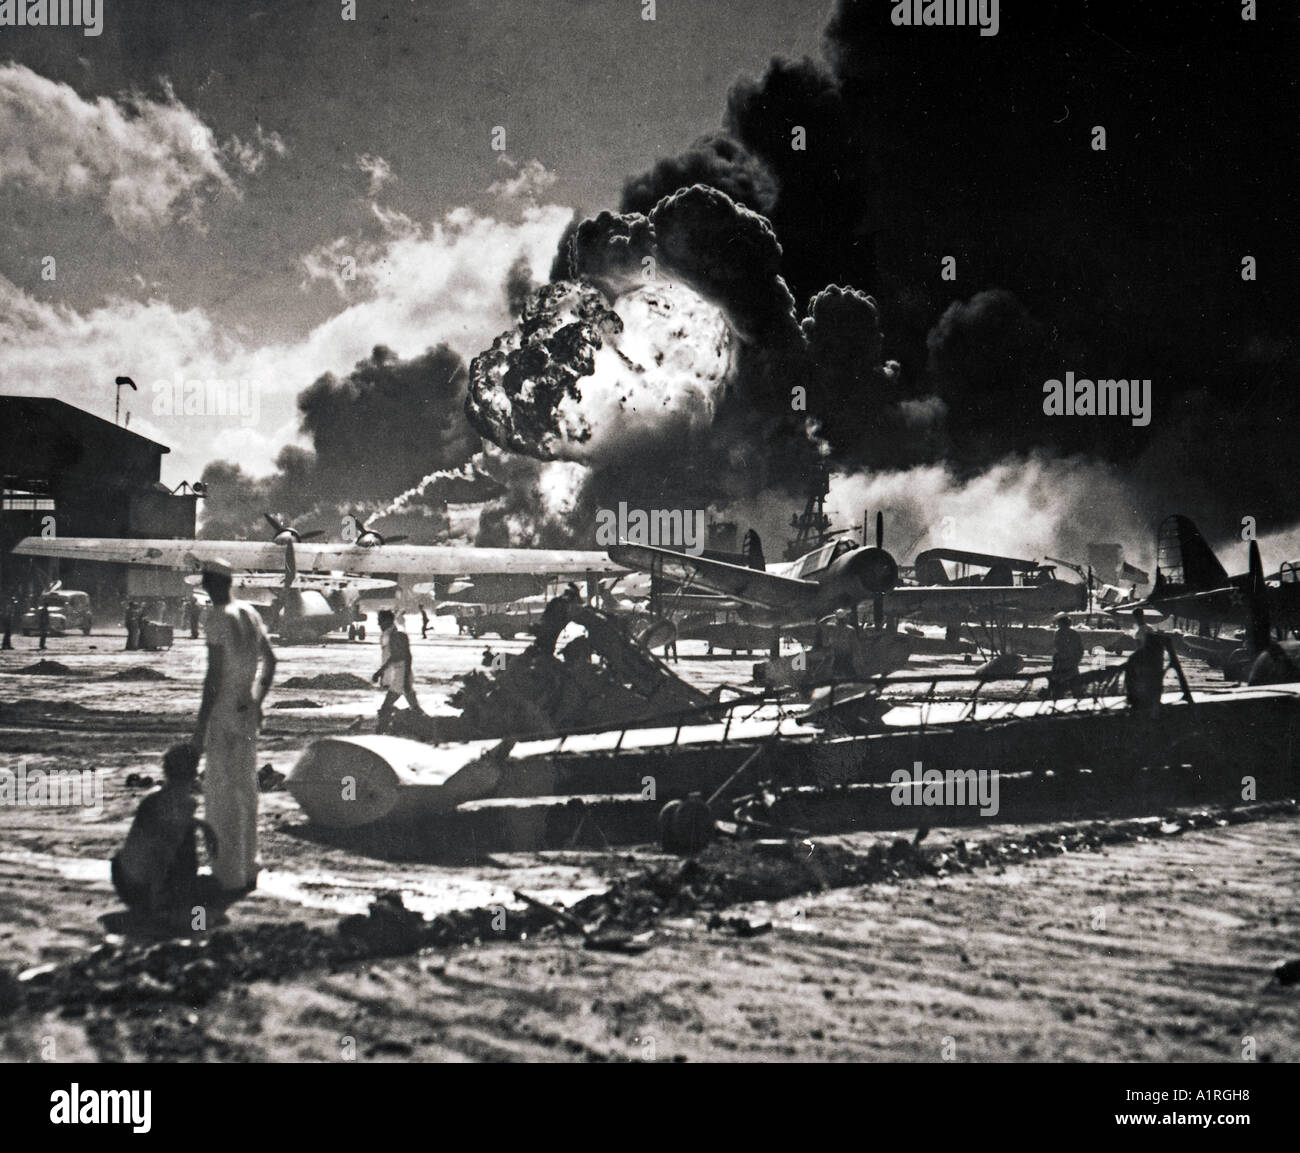 7 dicembre 1941 attacco giapponese a Pearl Harbor Oahu Hawaii Foto Stock